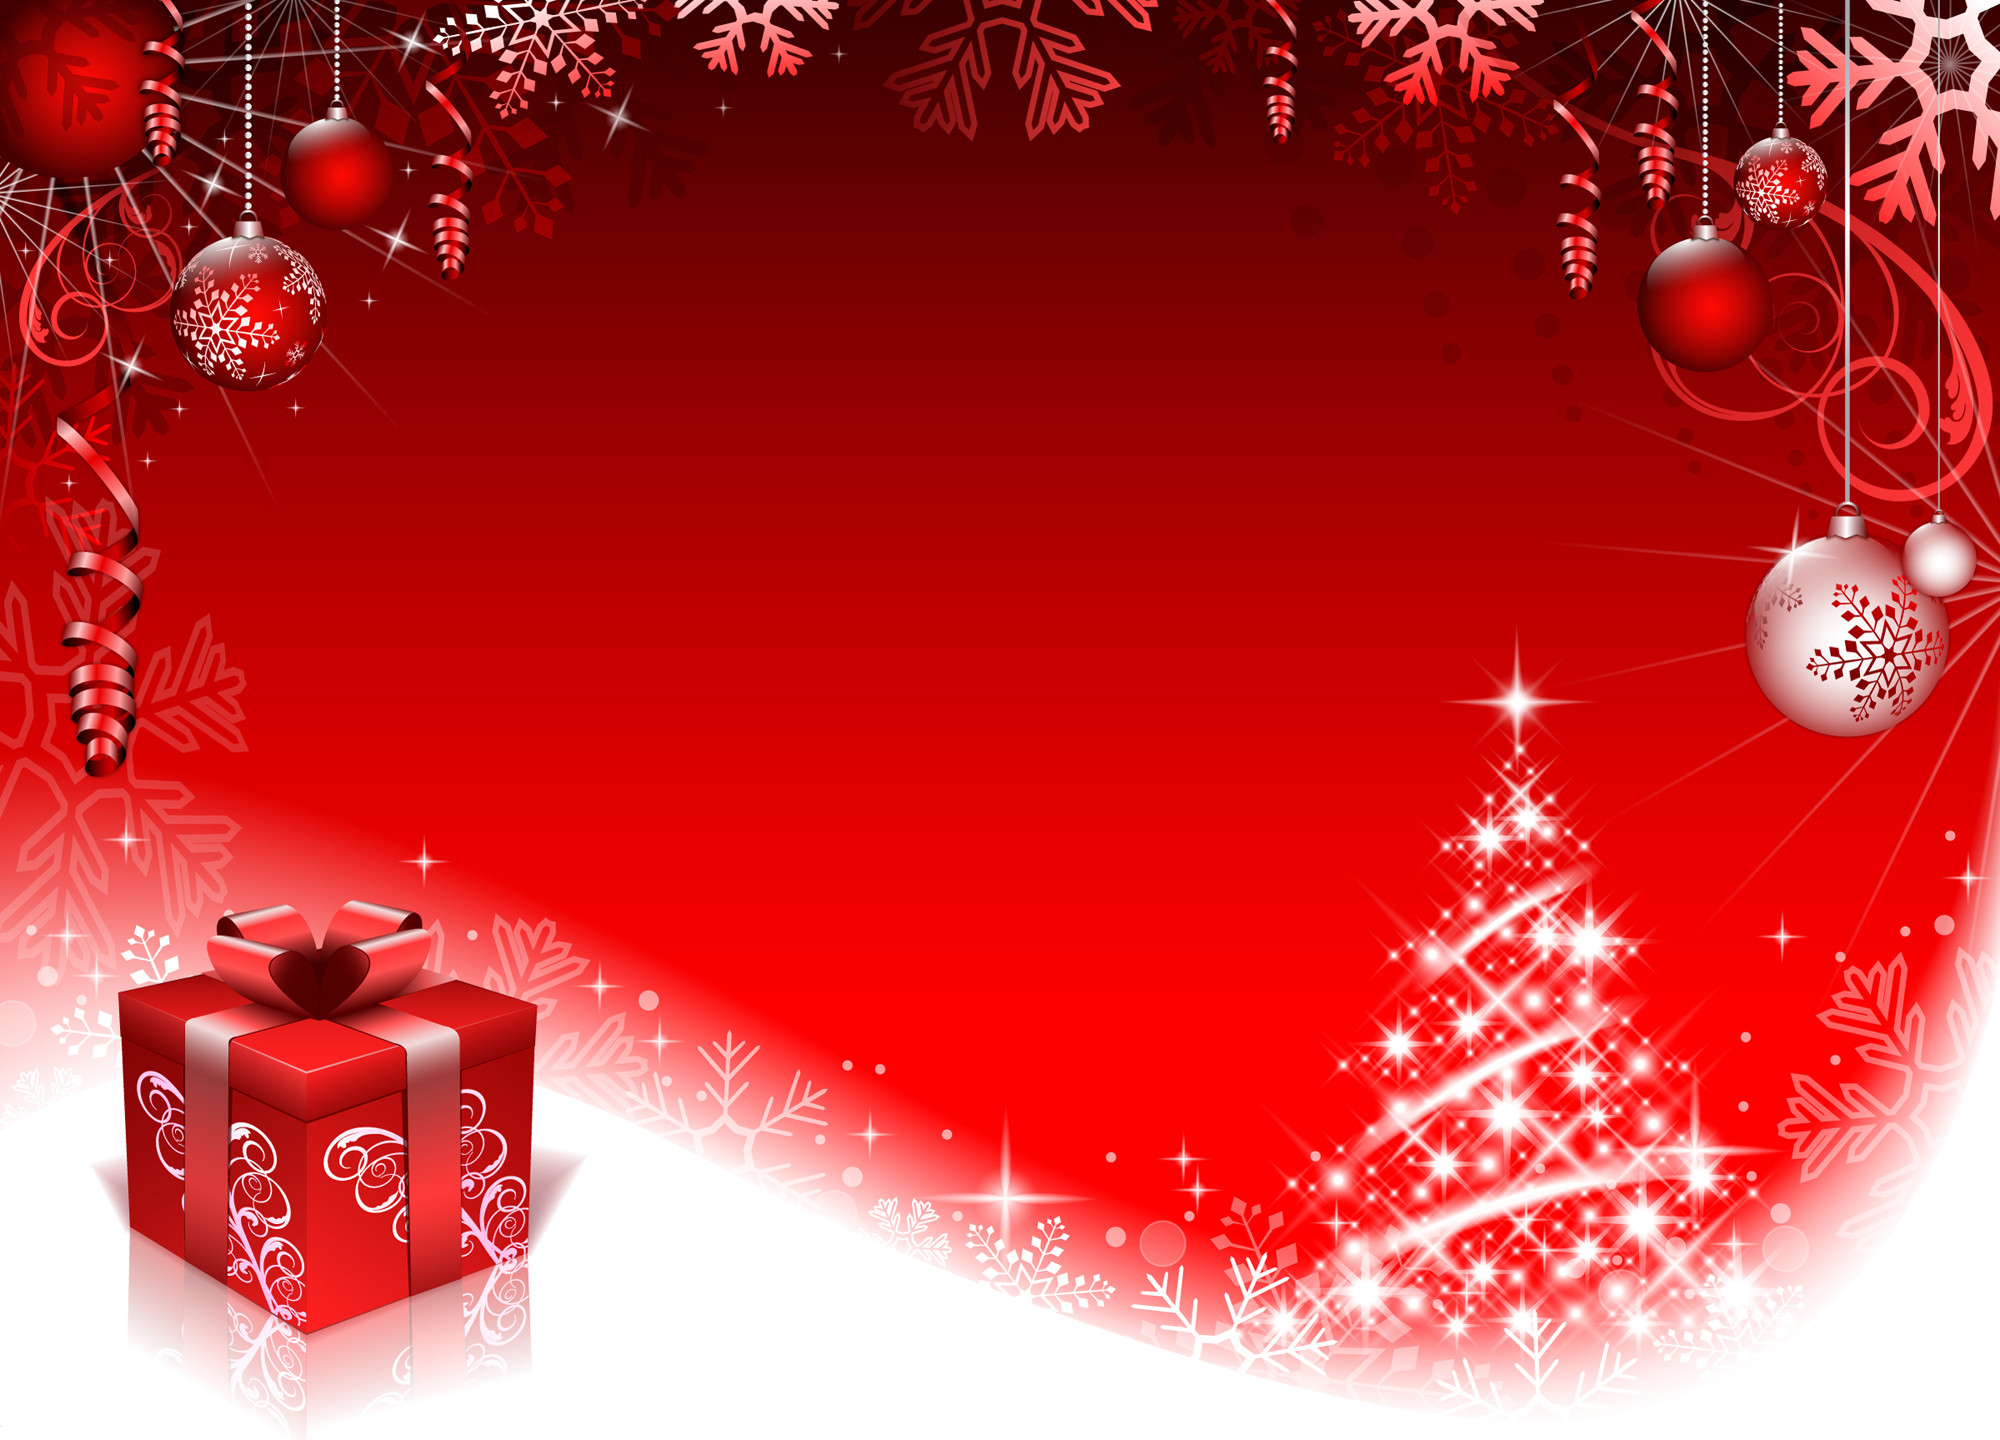 2000x1440 Red style Christmas background art vector 01